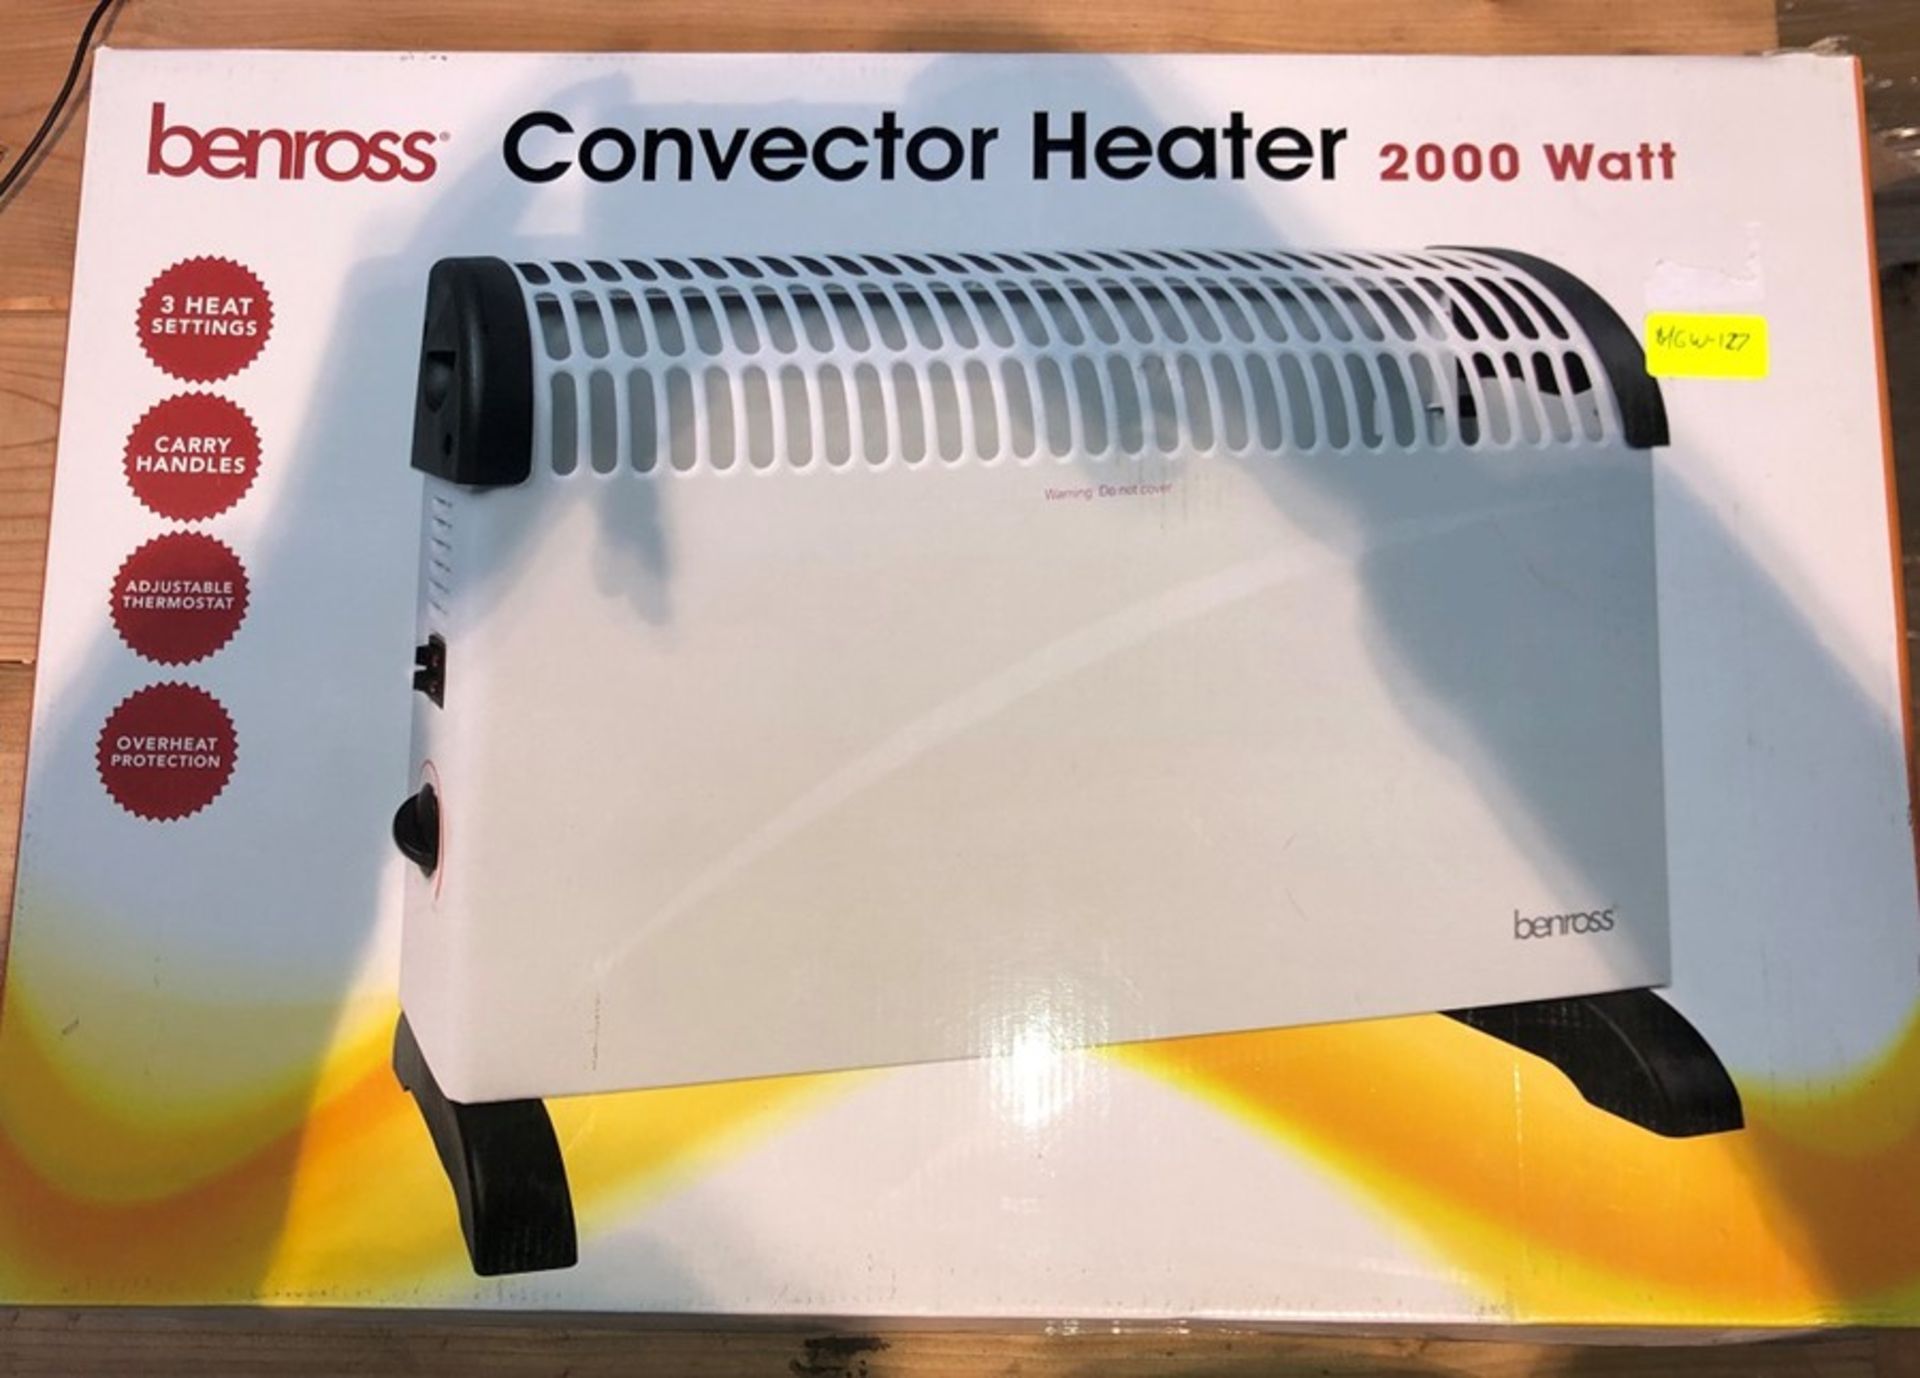 1 BOXED BENROSS CONVECTOR HEATER / RRP £30.96 (PUBLIC VIEWING AVAILABLE)